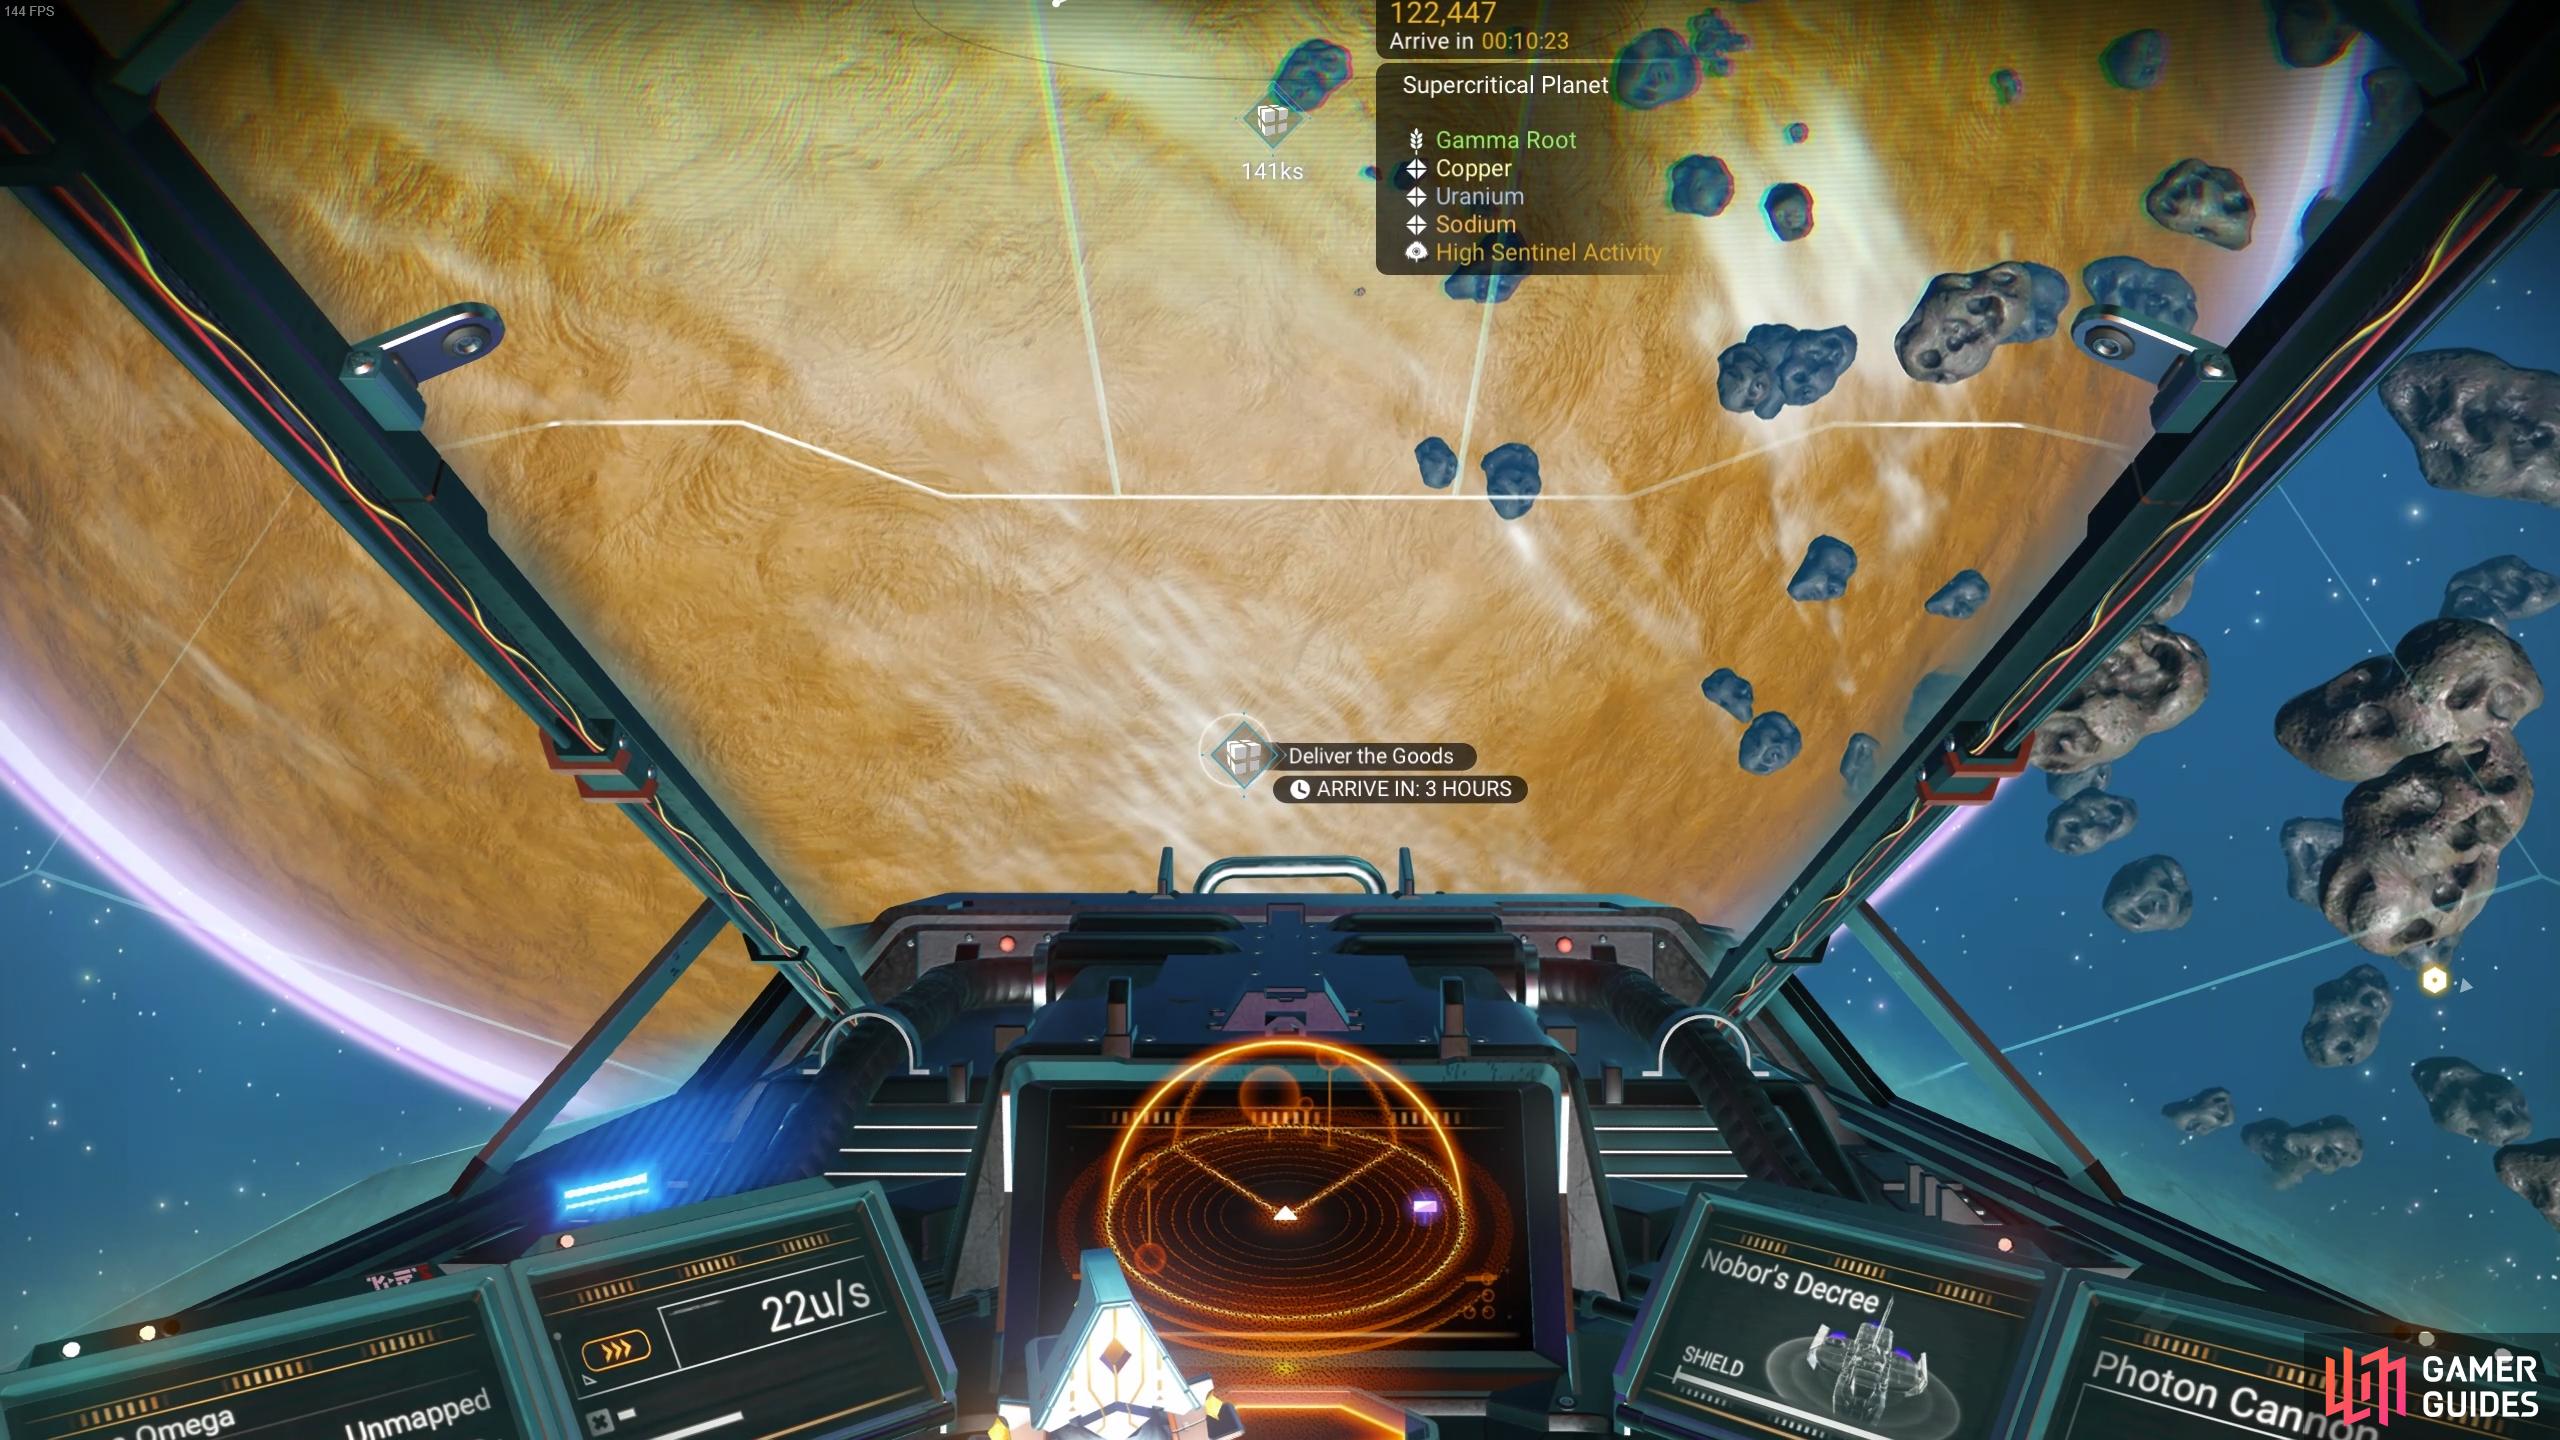 Delivery missions will have the destination indicated on the compass when you're in the right system.